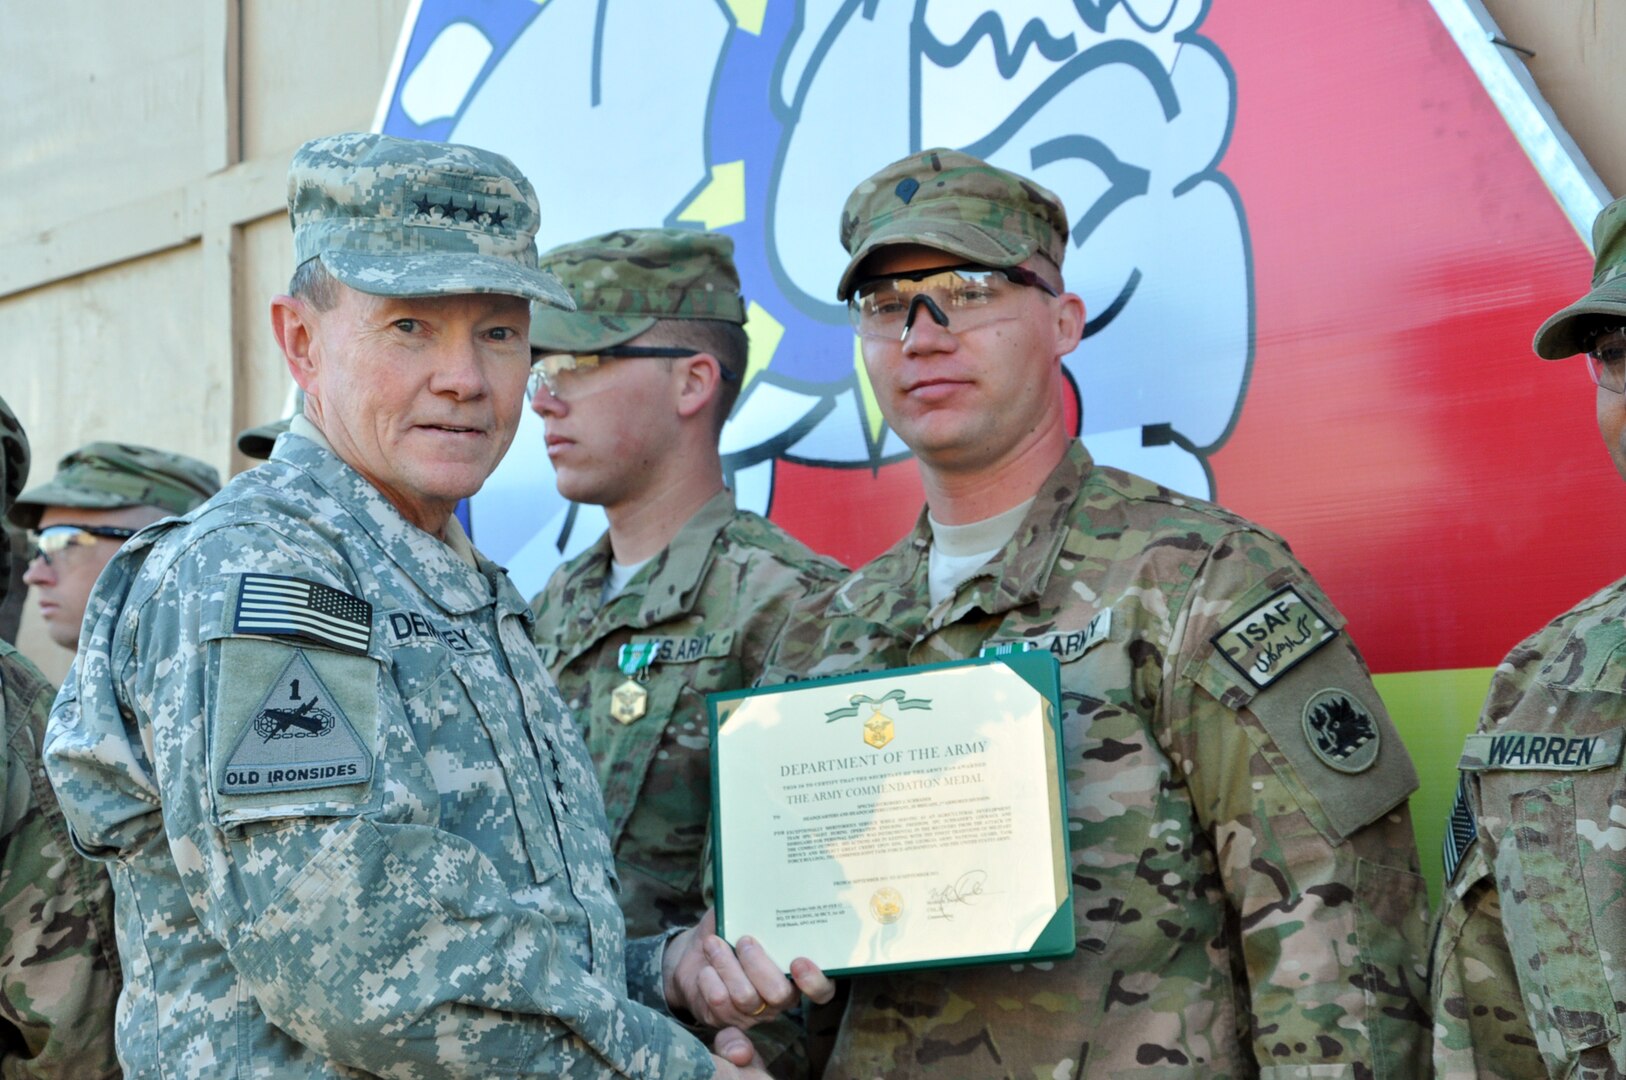 Army Gen. Martin Dempsey, the 18th Chairman of the Joint Chiefs of Staff, poses with Georgia Army National Guard Spc. Robert Schrader after presenting Schrader with an Army Commendation Medal Feb. 10, 2012 at Forward Operating Base Shank, Afghanistan. Schrader received the award for his actions following a vehicle born improvised explosive device attack on Command Outpost Sayed Abad September 2011.